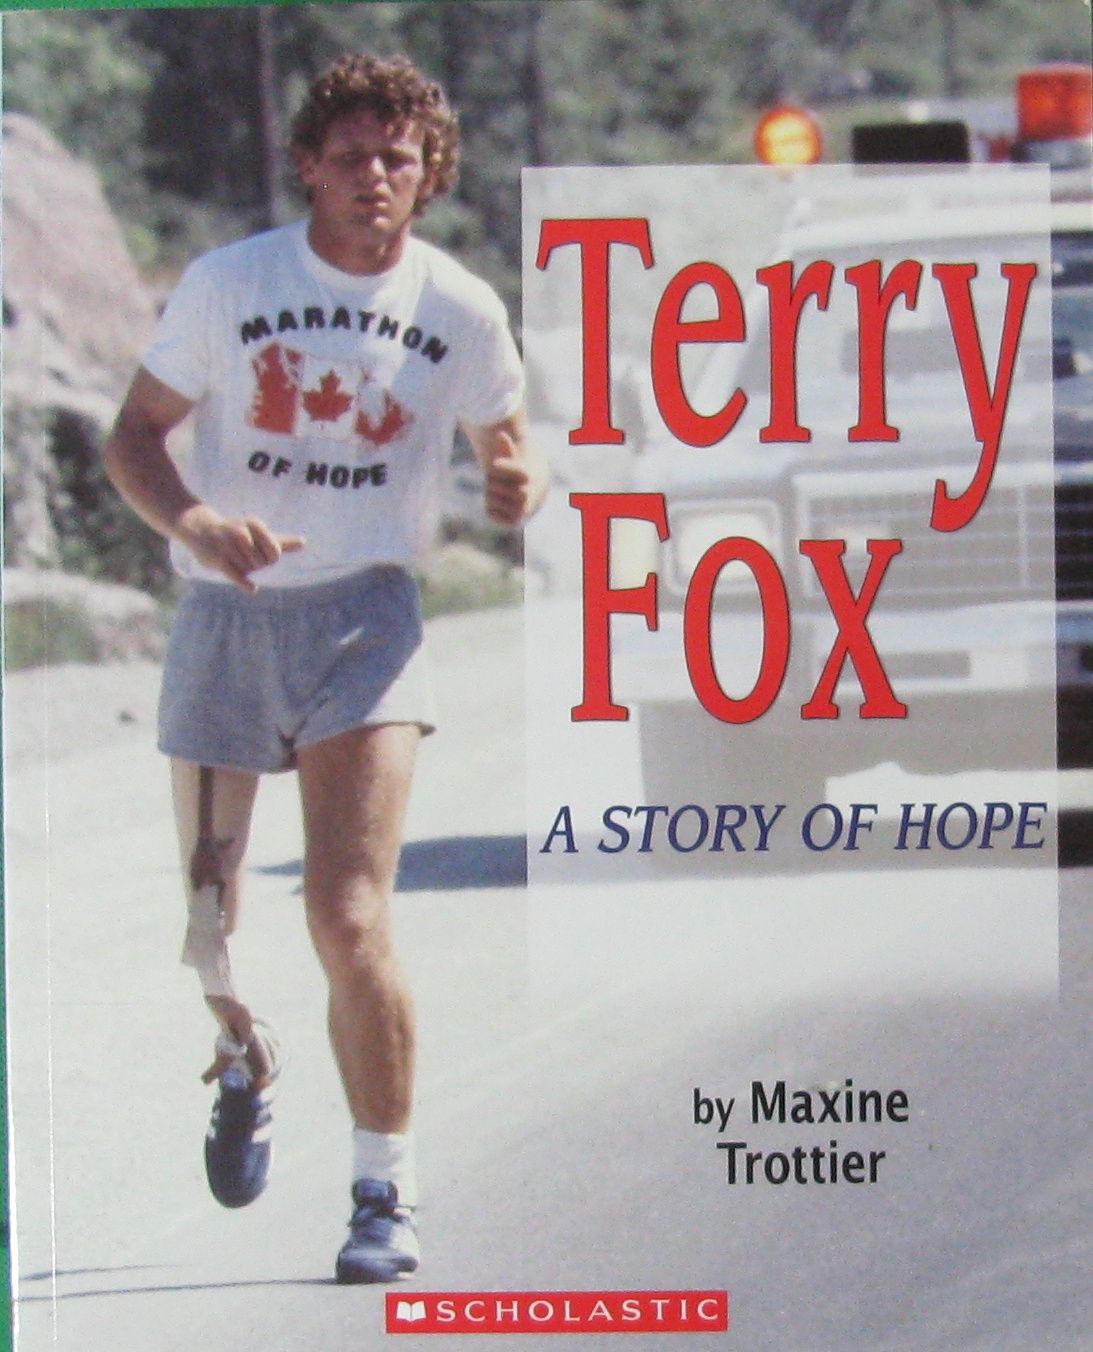 terry fox: a story of hope maxine trottier